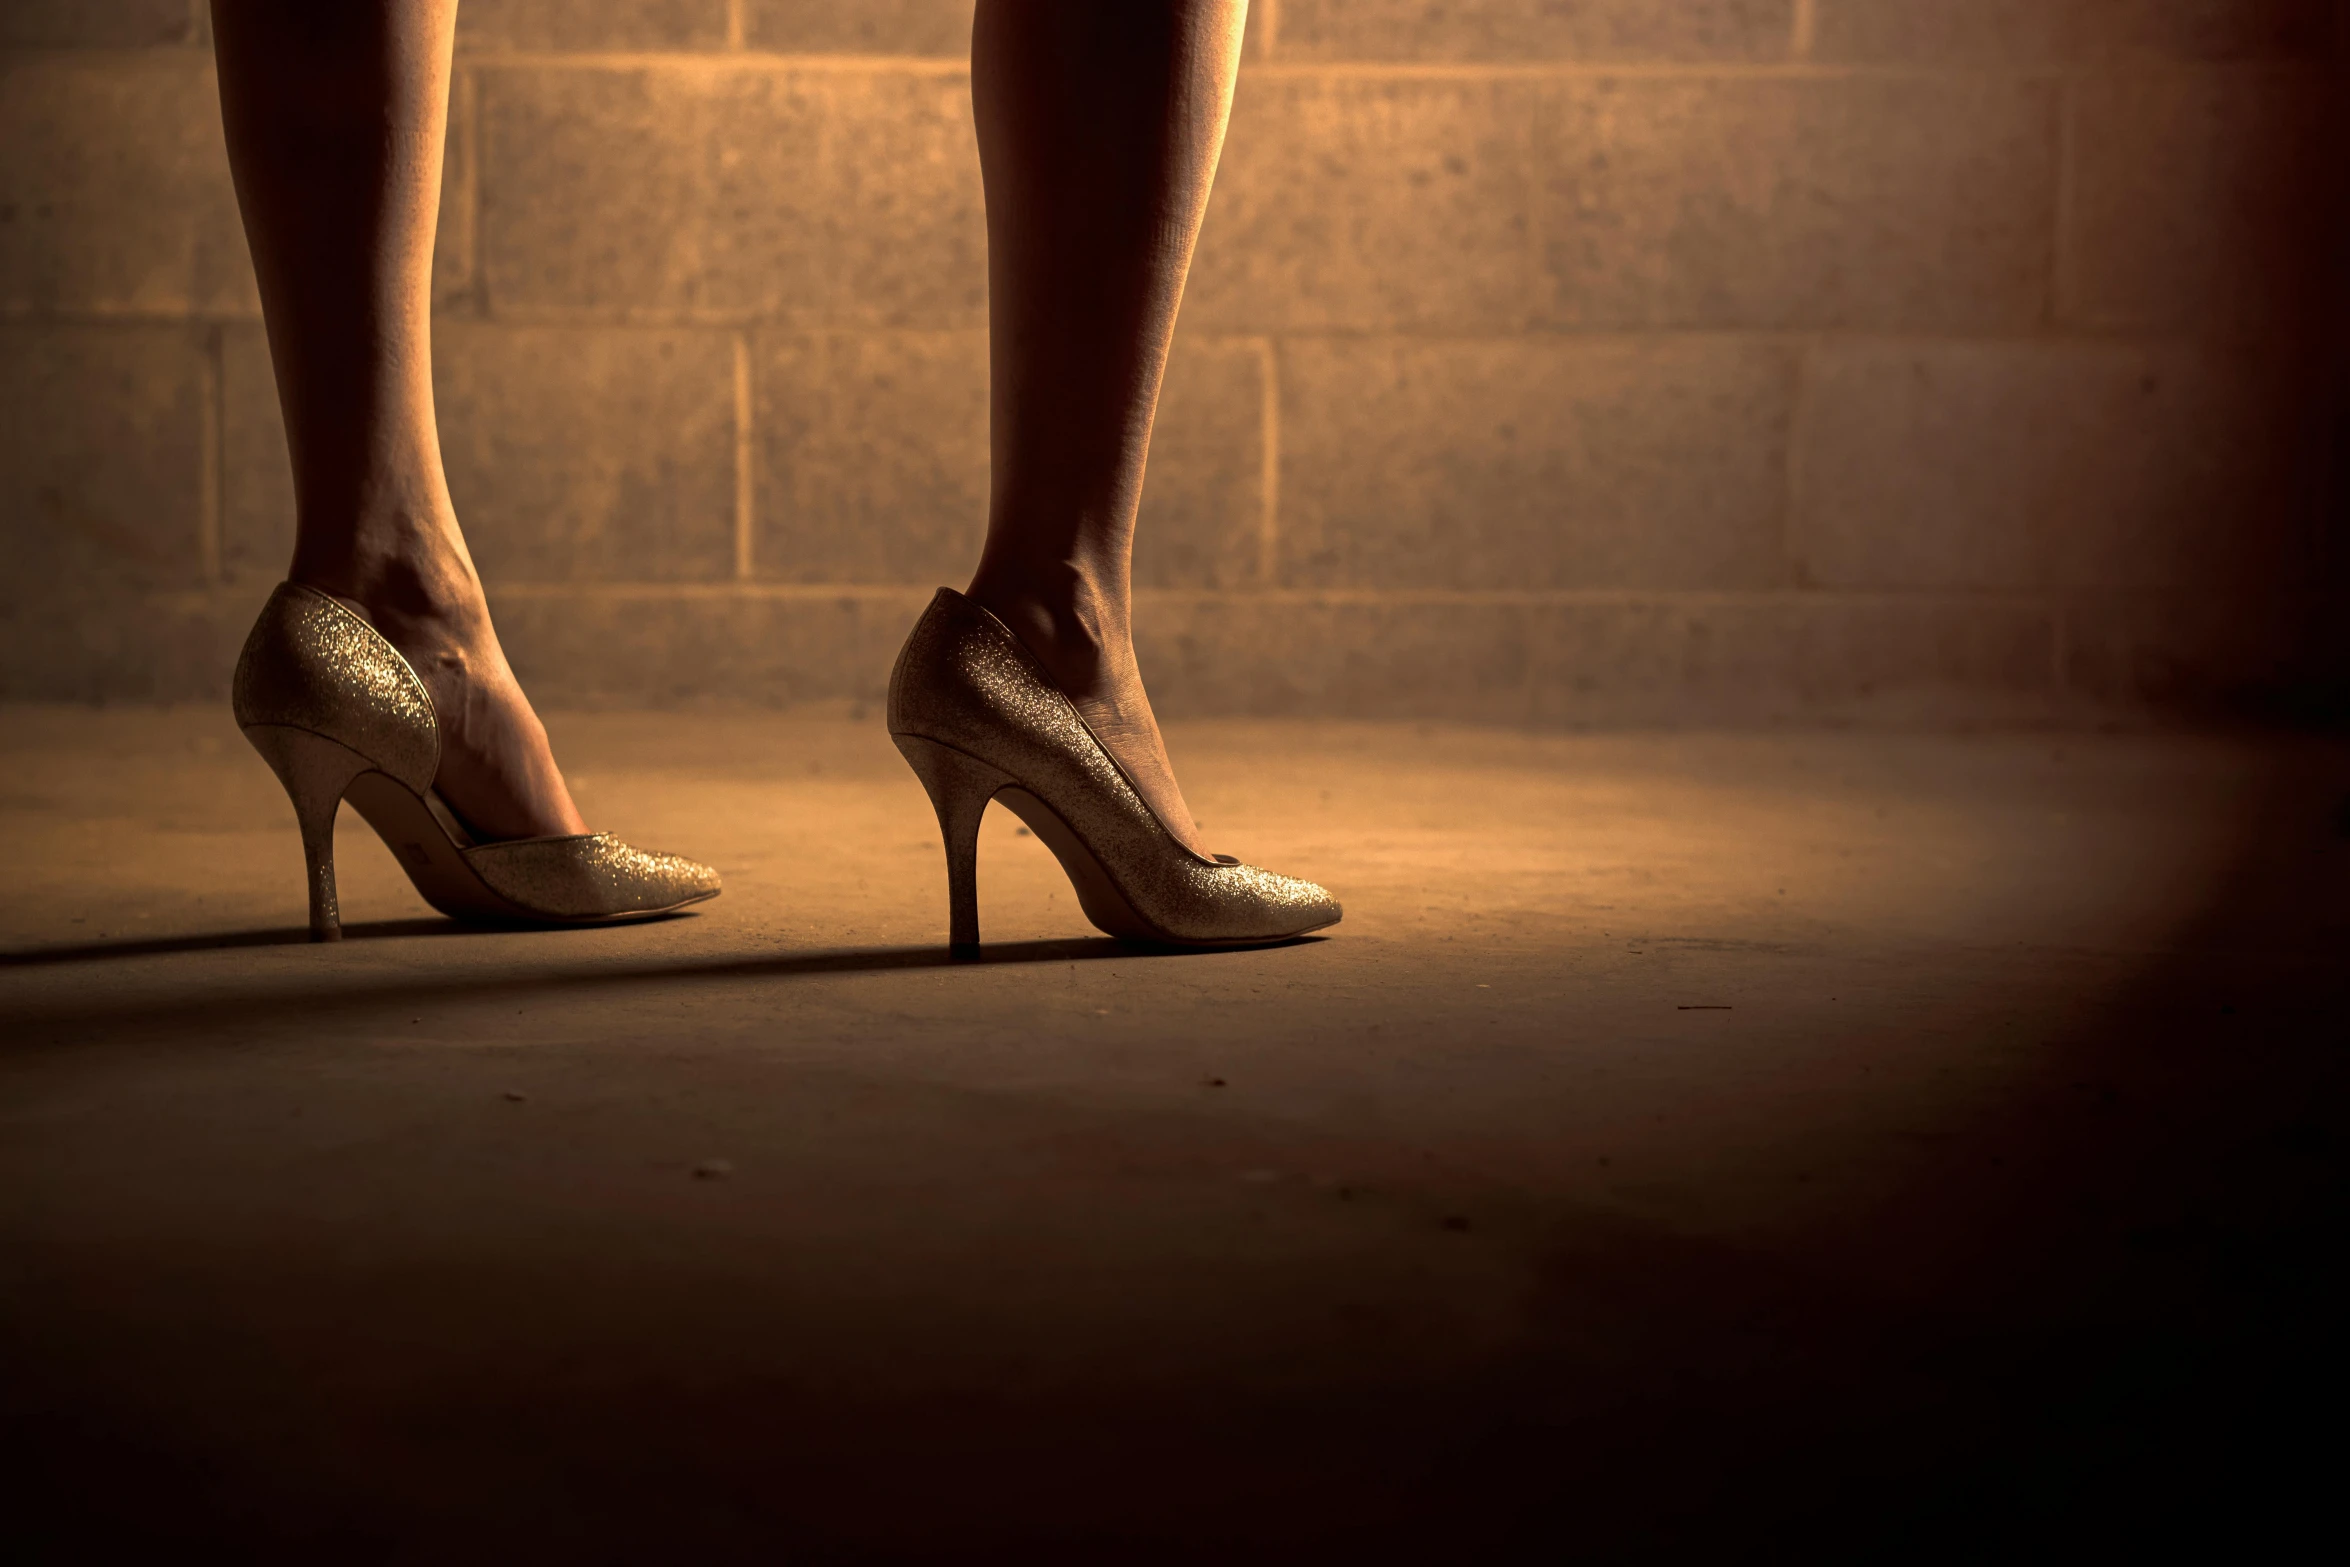 the legs of a woman in high heels, inspired by Nan Goldin, pexels contest winner, renaissance, dimly lit underground dungeon, gold dappled light, standing in an arena, recital